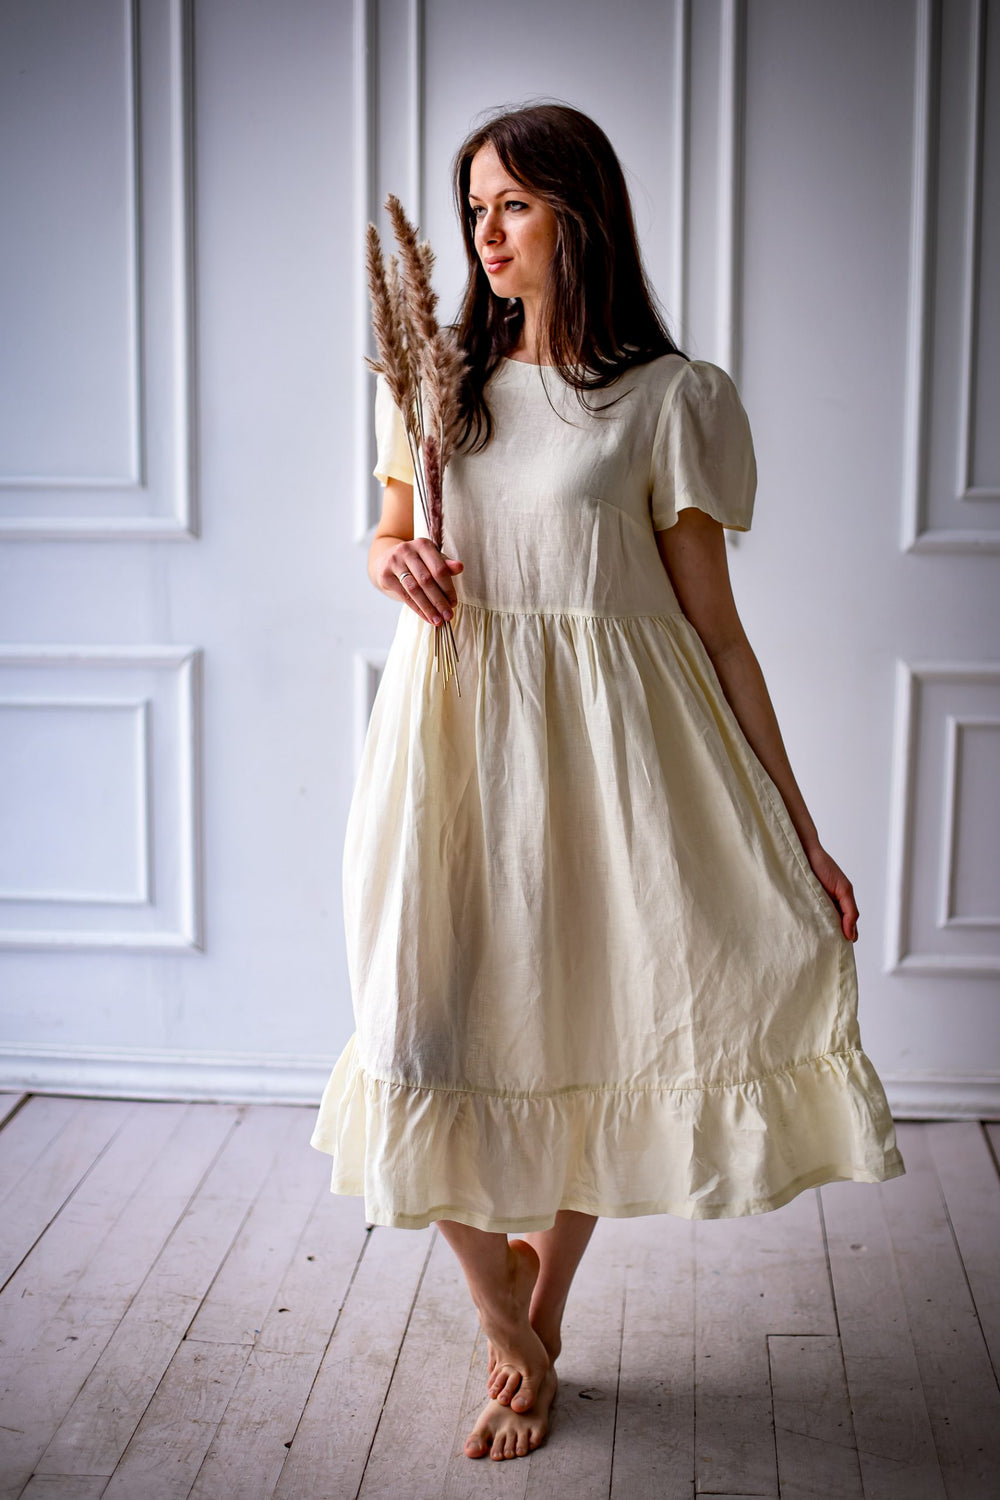 Woman wearing the Naya Dress sewing pattern from Kates Sewing Patterns on The Fold Line. A dress pattern made in cotton or linen fabrics, featuring a high waistline, bust darts, voluminous sleeves with gathers at the top, full skirt gathered at the waist 